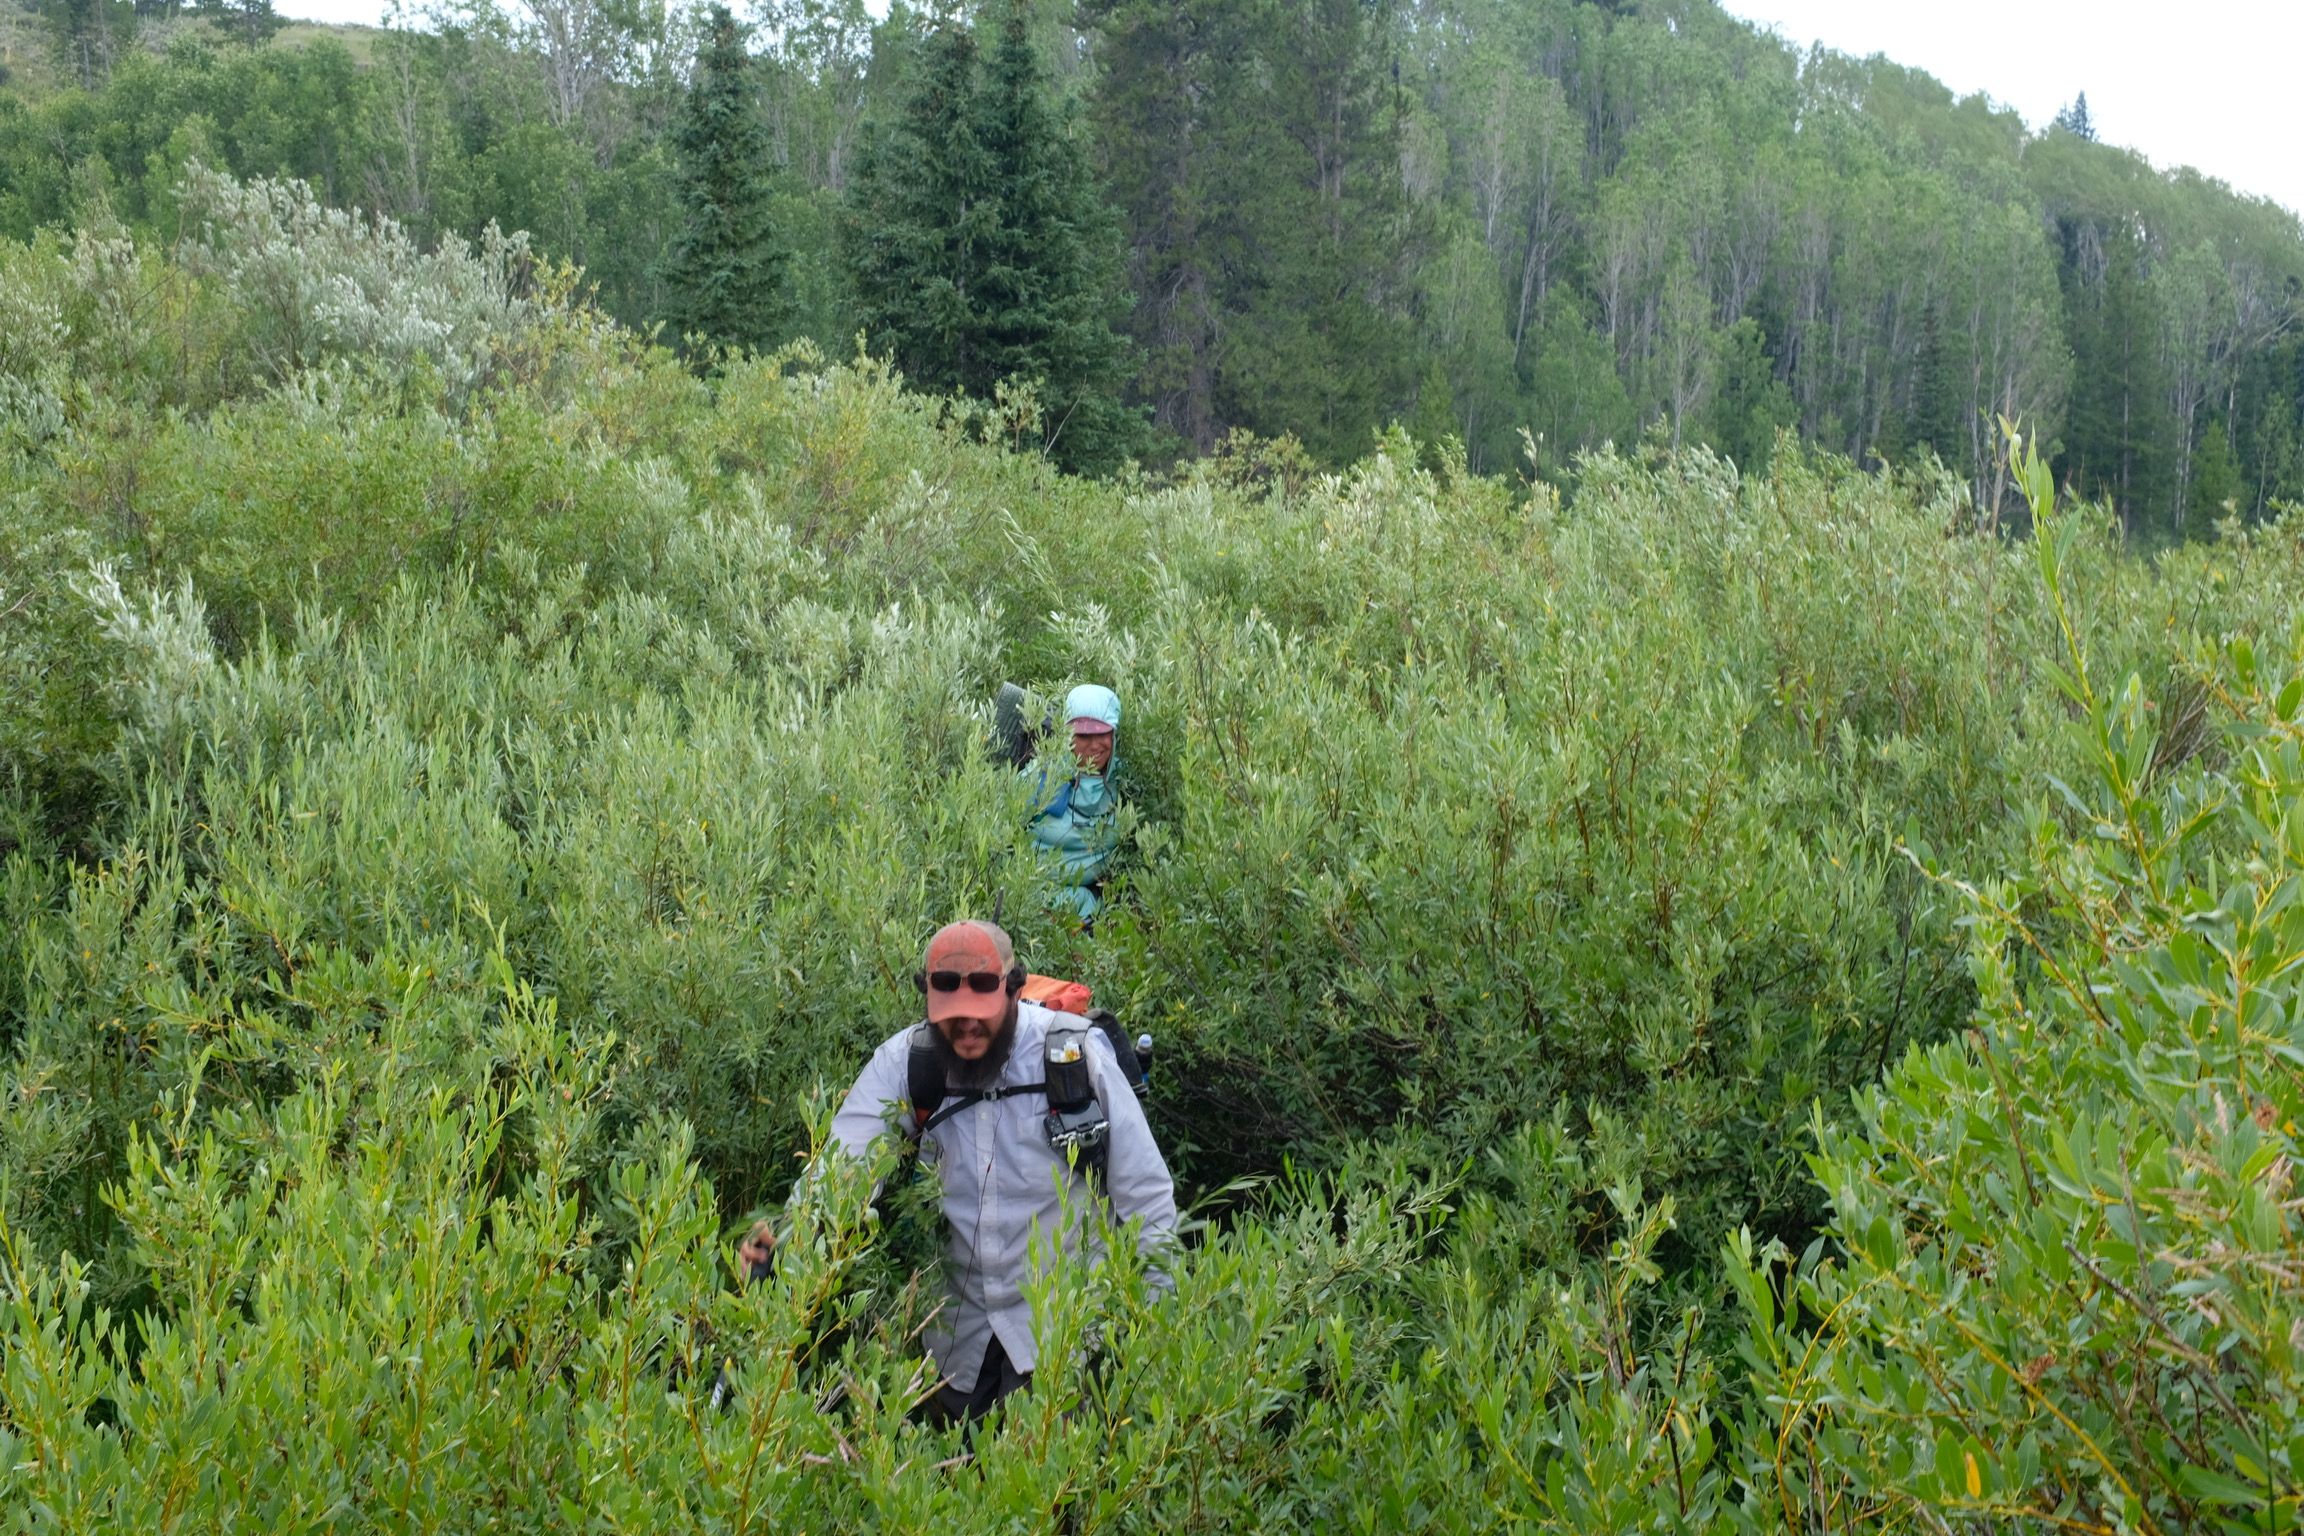 Bushwhacking to get into the Gros Ventre wilderness